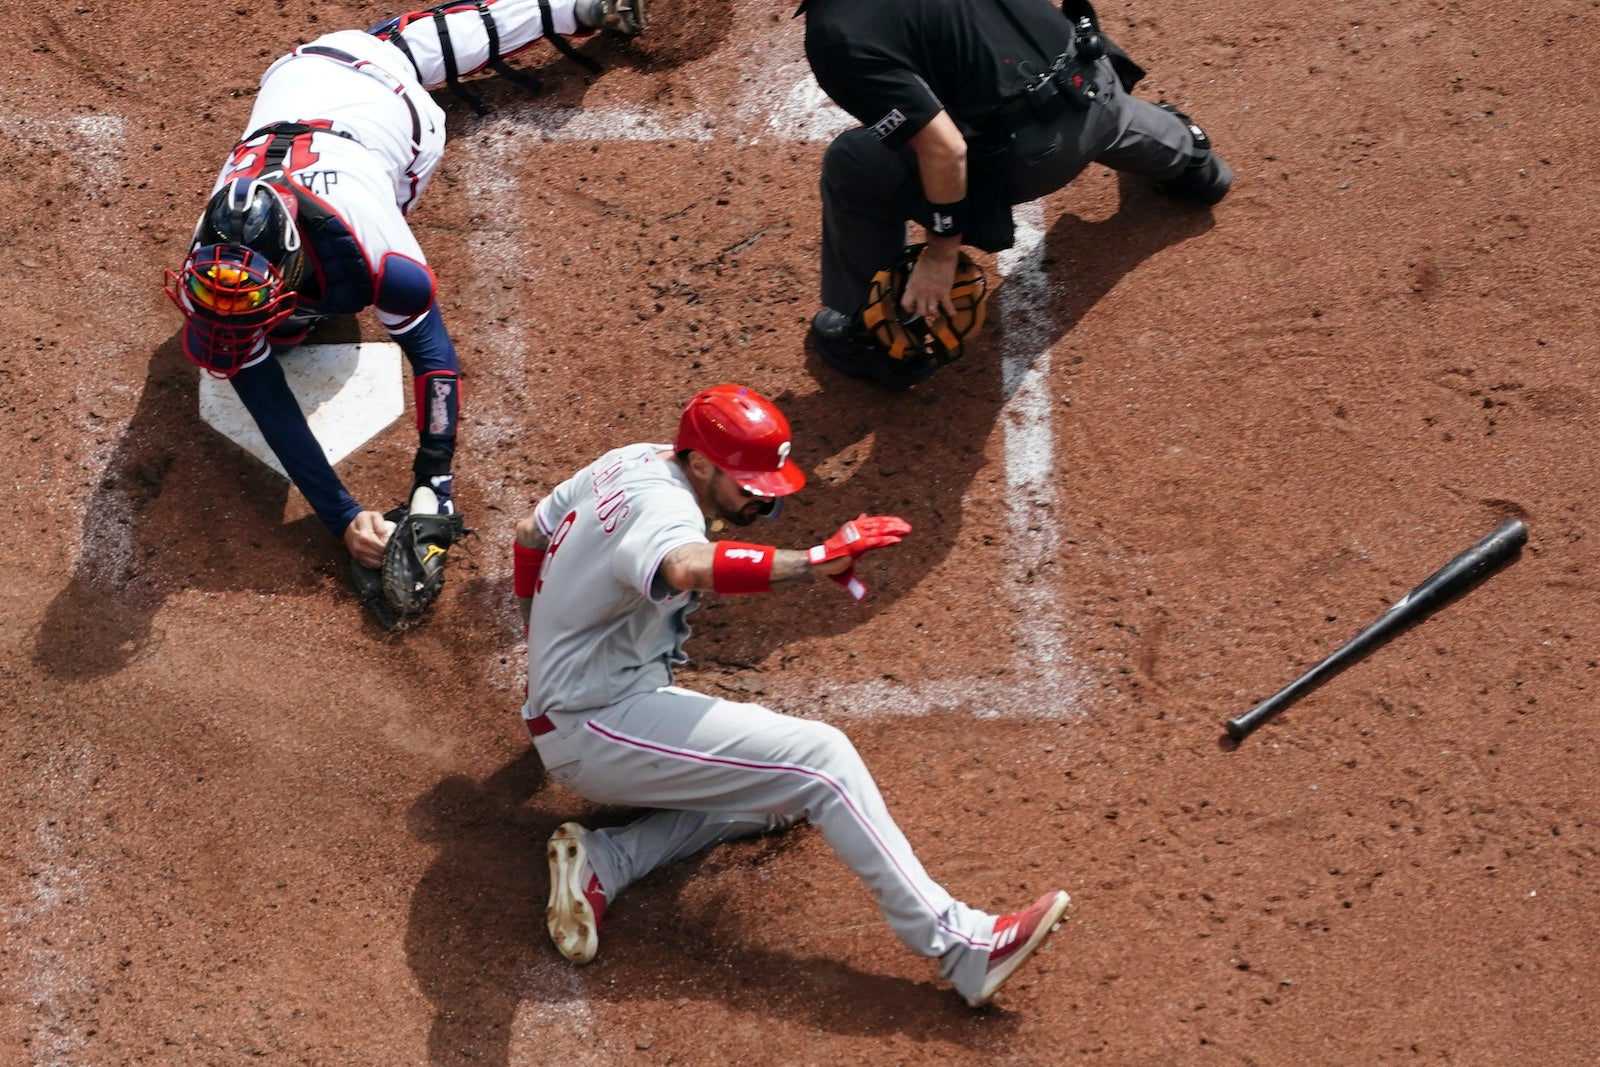 Castellanos hits 2 homers again, powers Phillies past Braves 3-1 and into  2nd straight NLCS